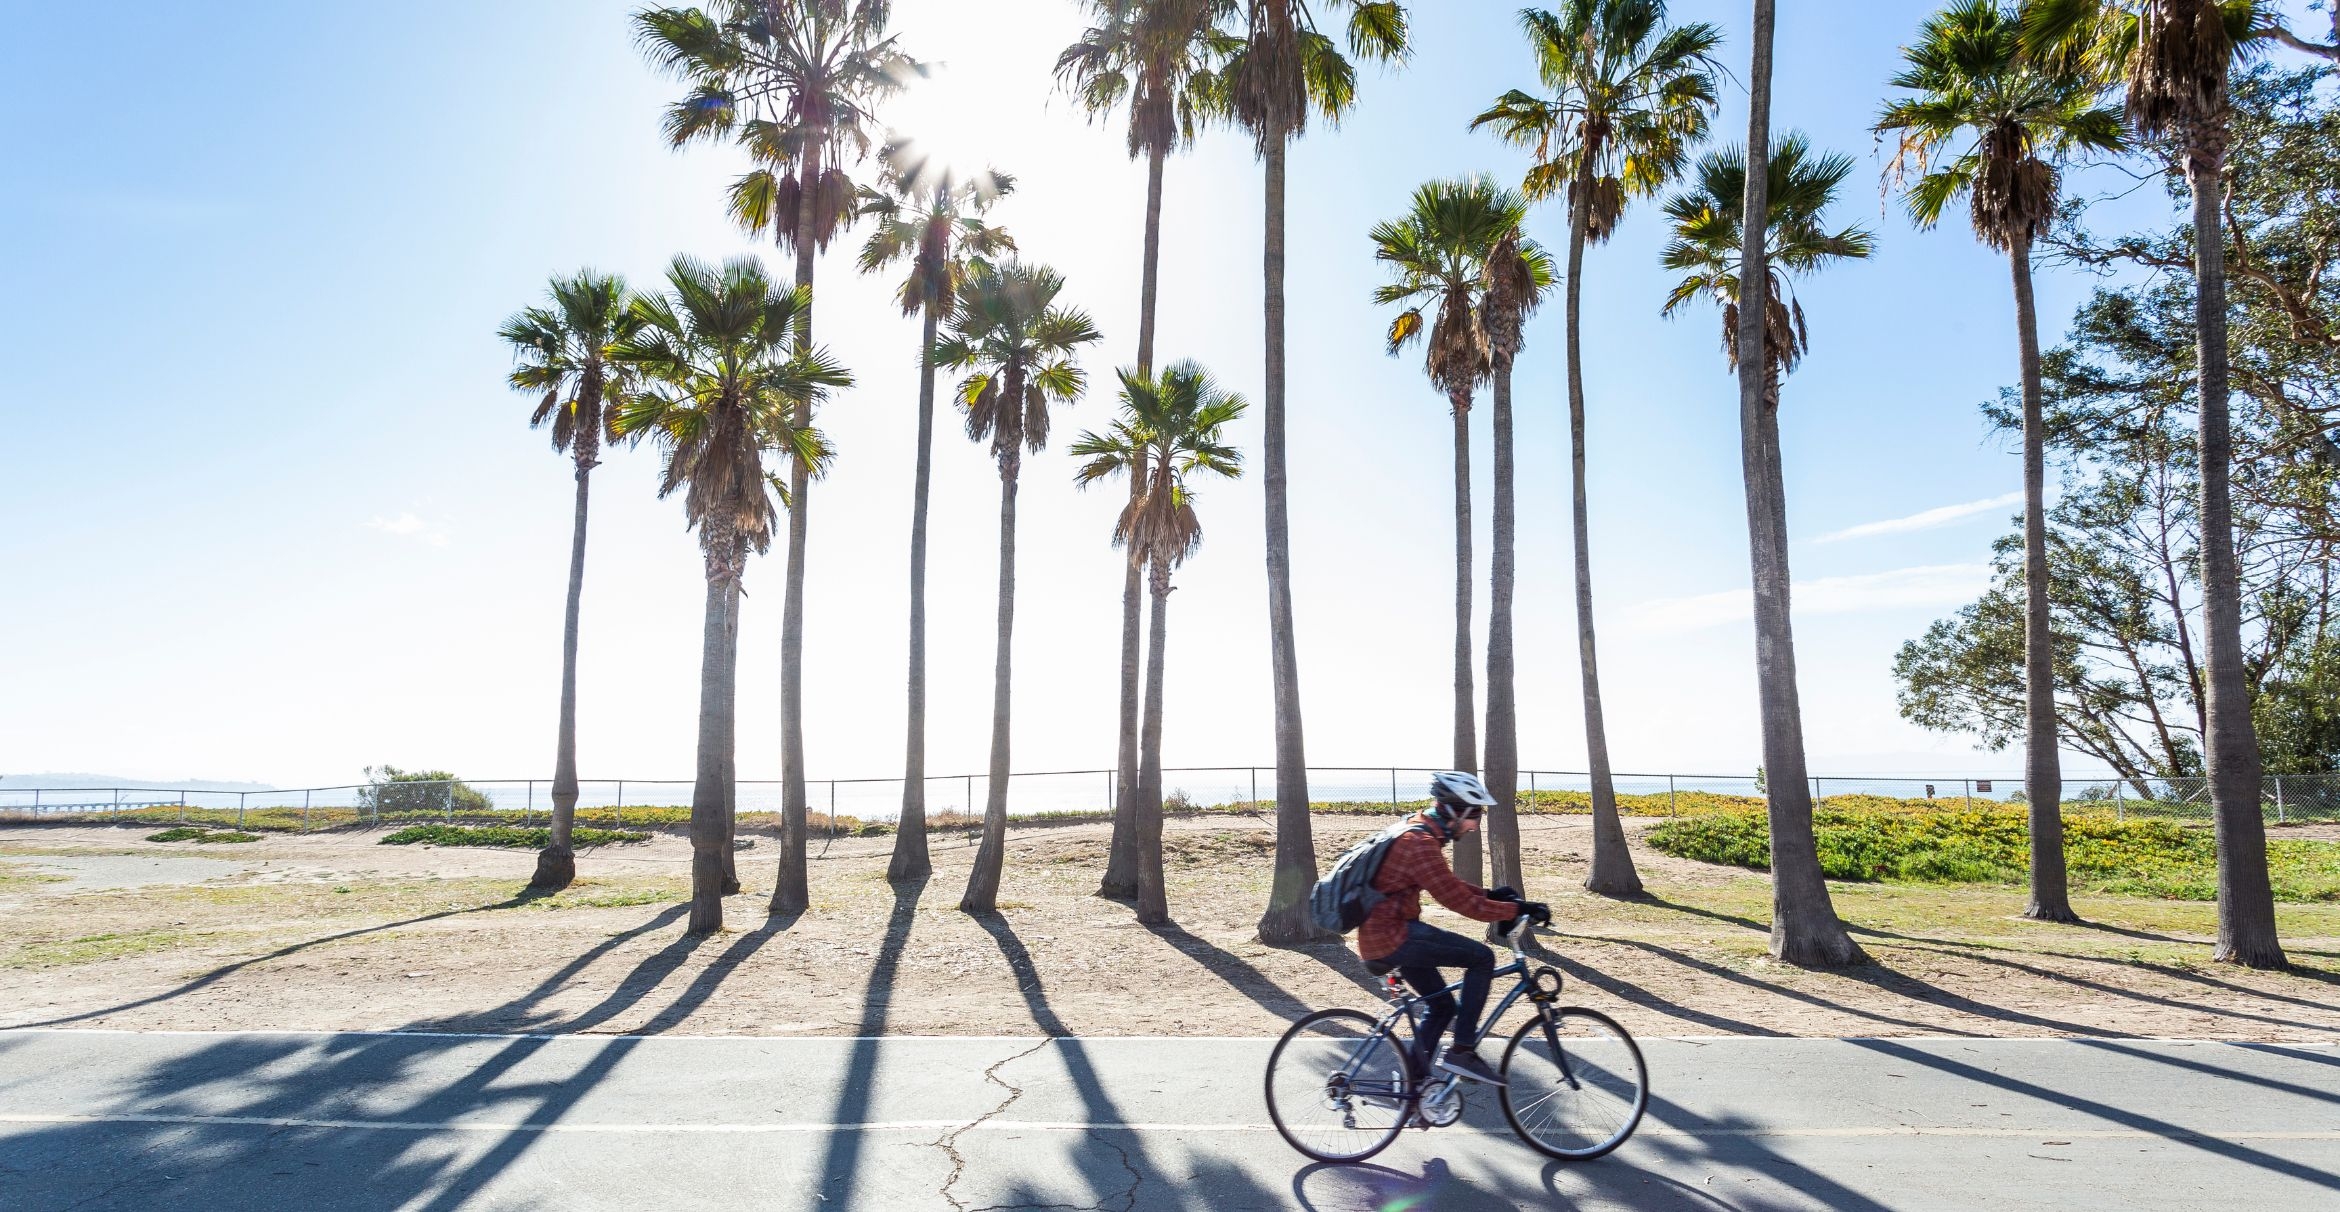 A cyclist rides beneath the palm trees along UCSB’s costal bluffs.